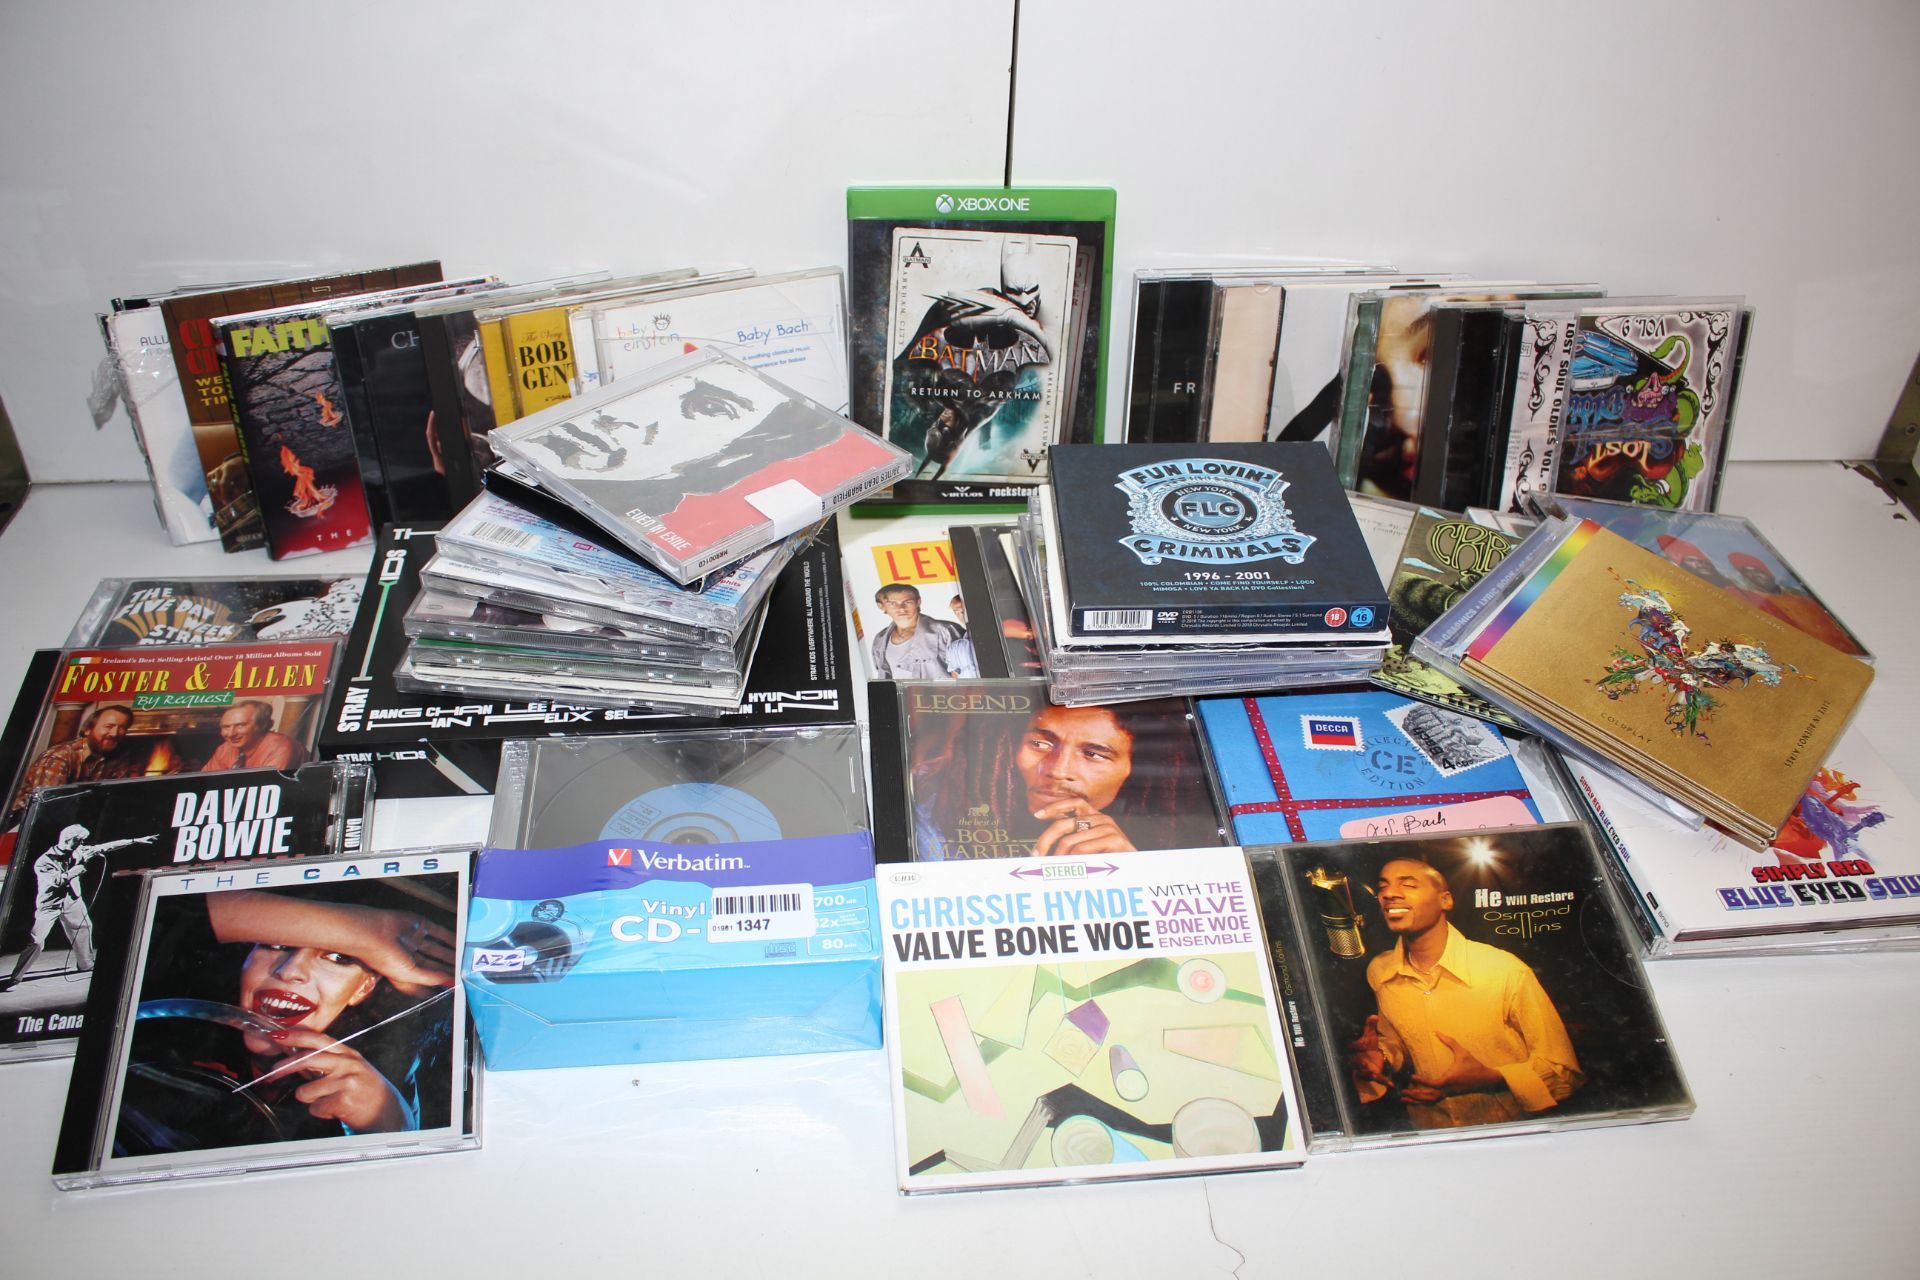 60X ASSORTED CD TITLES TO INCLUDE COLDPLAY, BOB MARLEY, XBOX & MANY OTHERS (IMAGE DEPICTS STOCK)